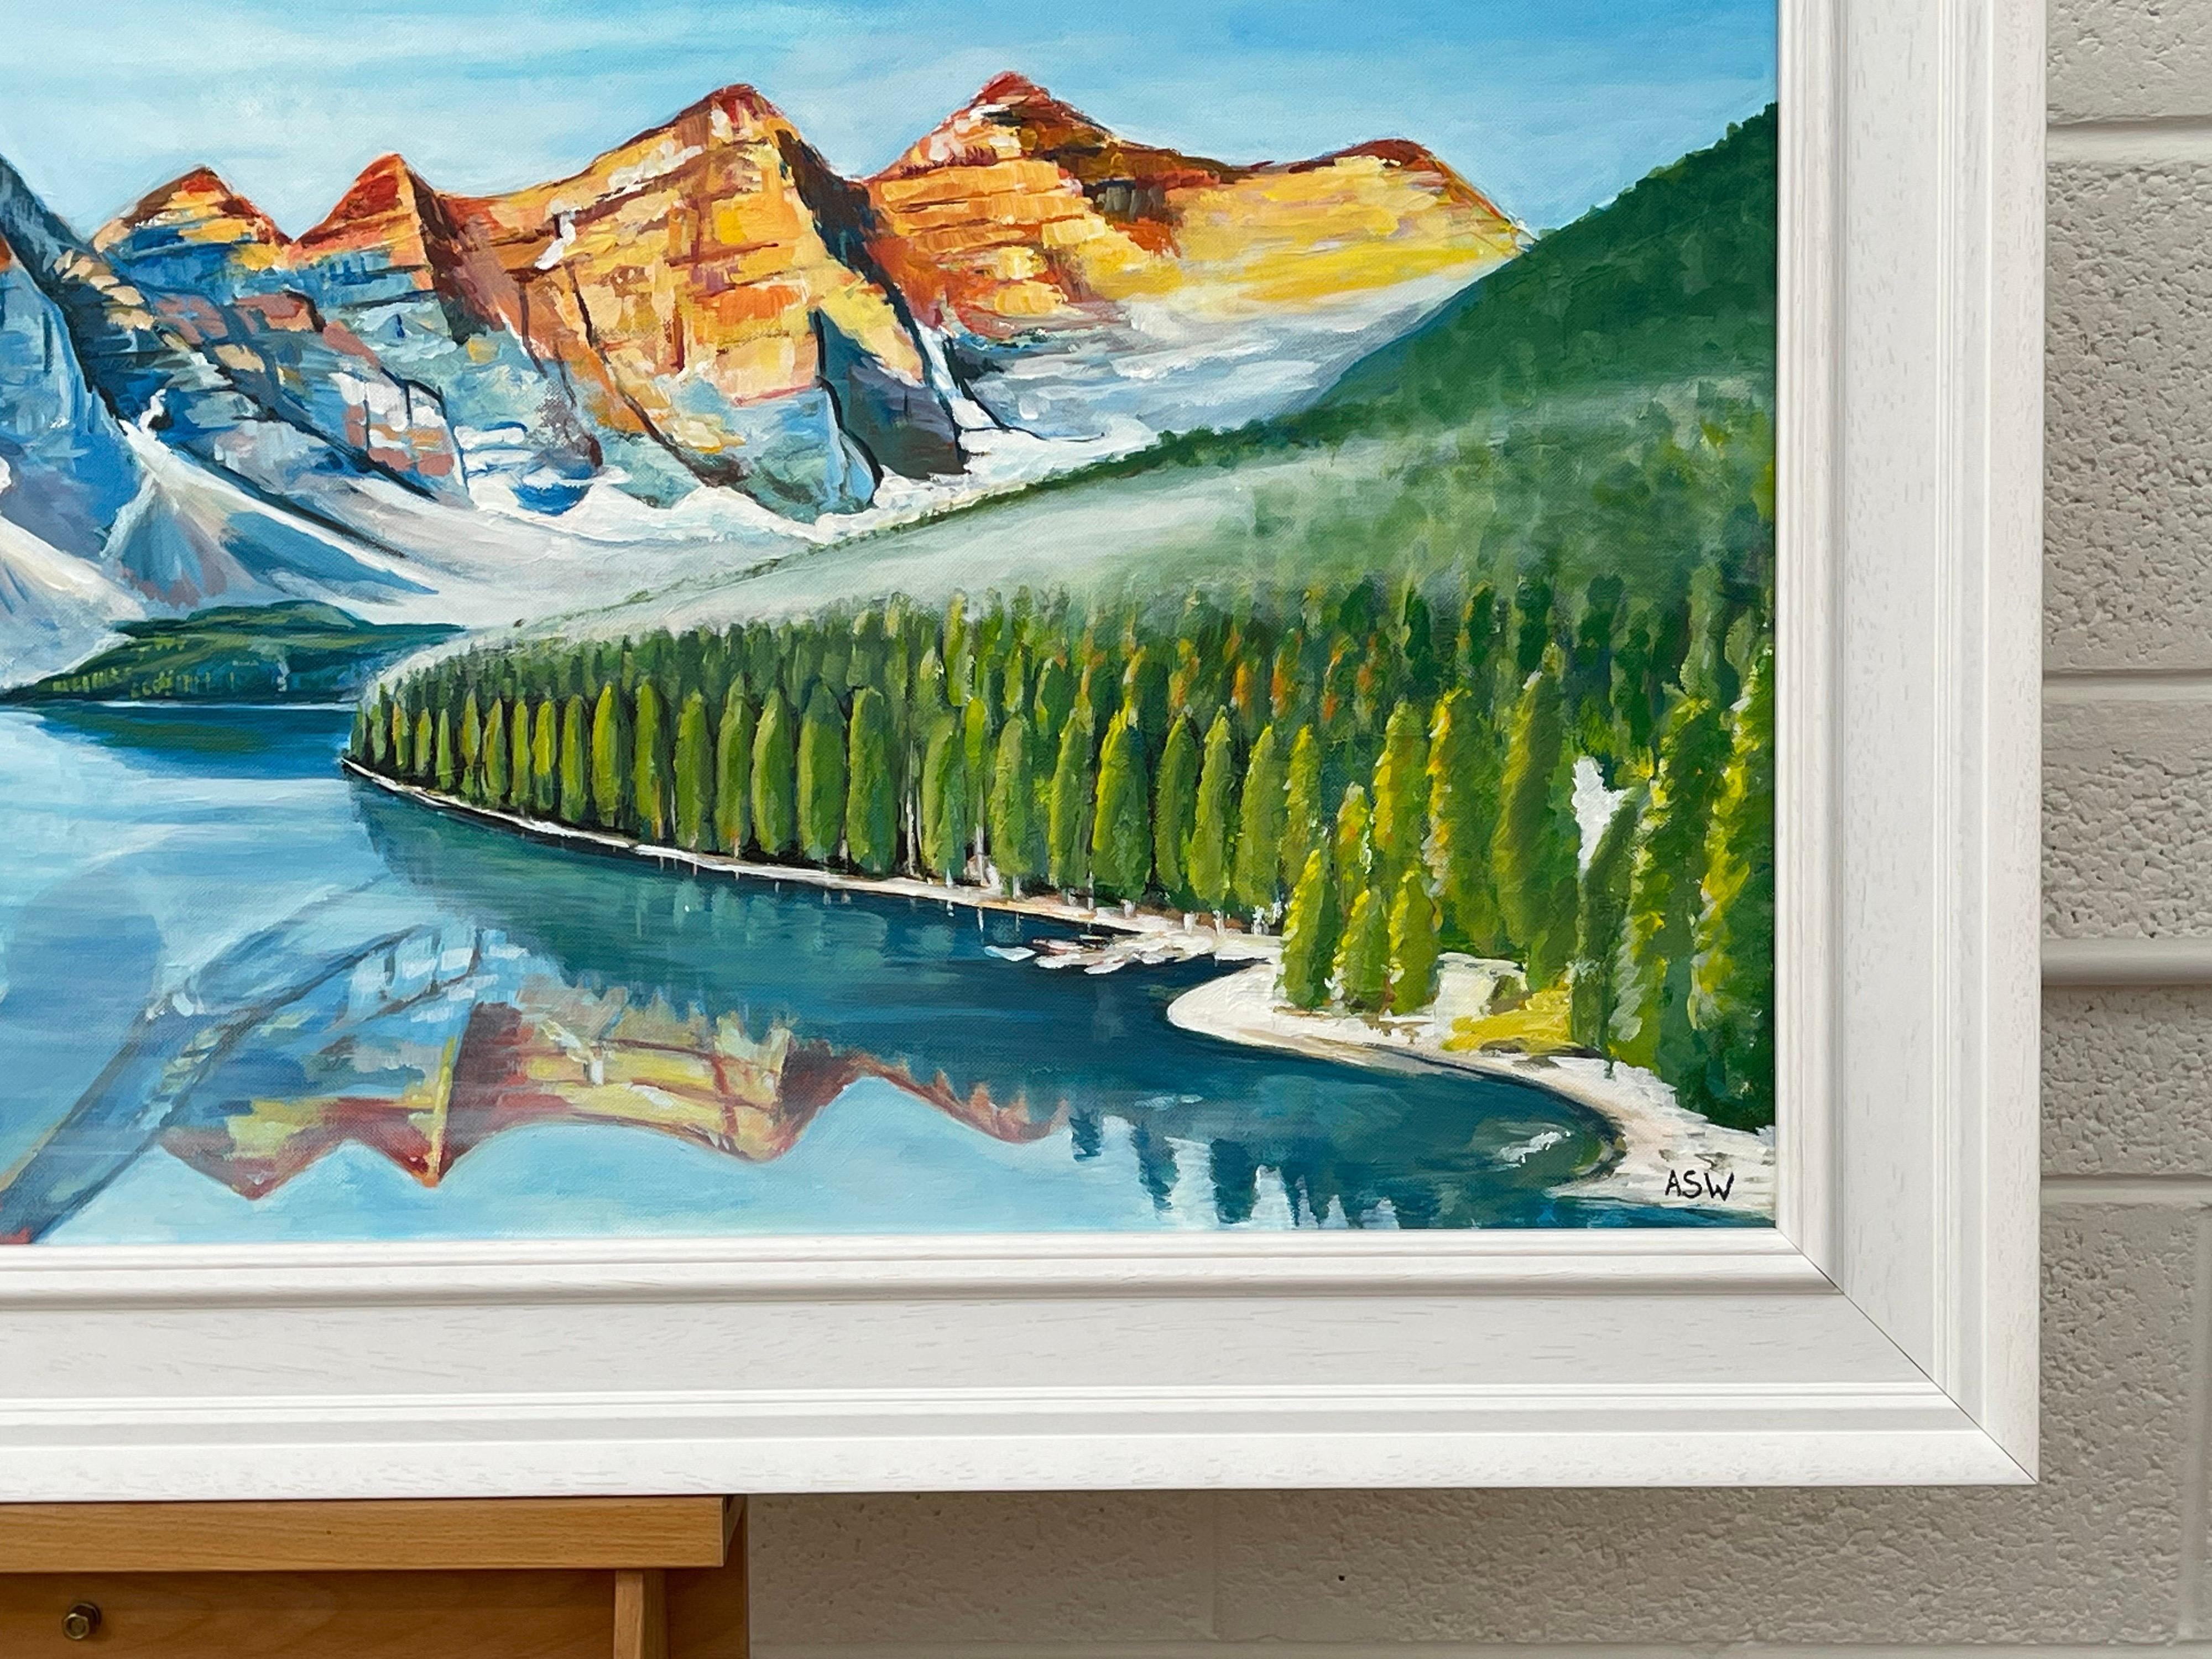 Modern Landscape Painting of Lake Moraine in Lake Alberta Canada by Contemporary Artist

Art measures 40 x 20 inches
Frame measures 46 x 26 inches (framed in a high quality modern white moulding) 

Angela Wakefield has twice been on the front cover